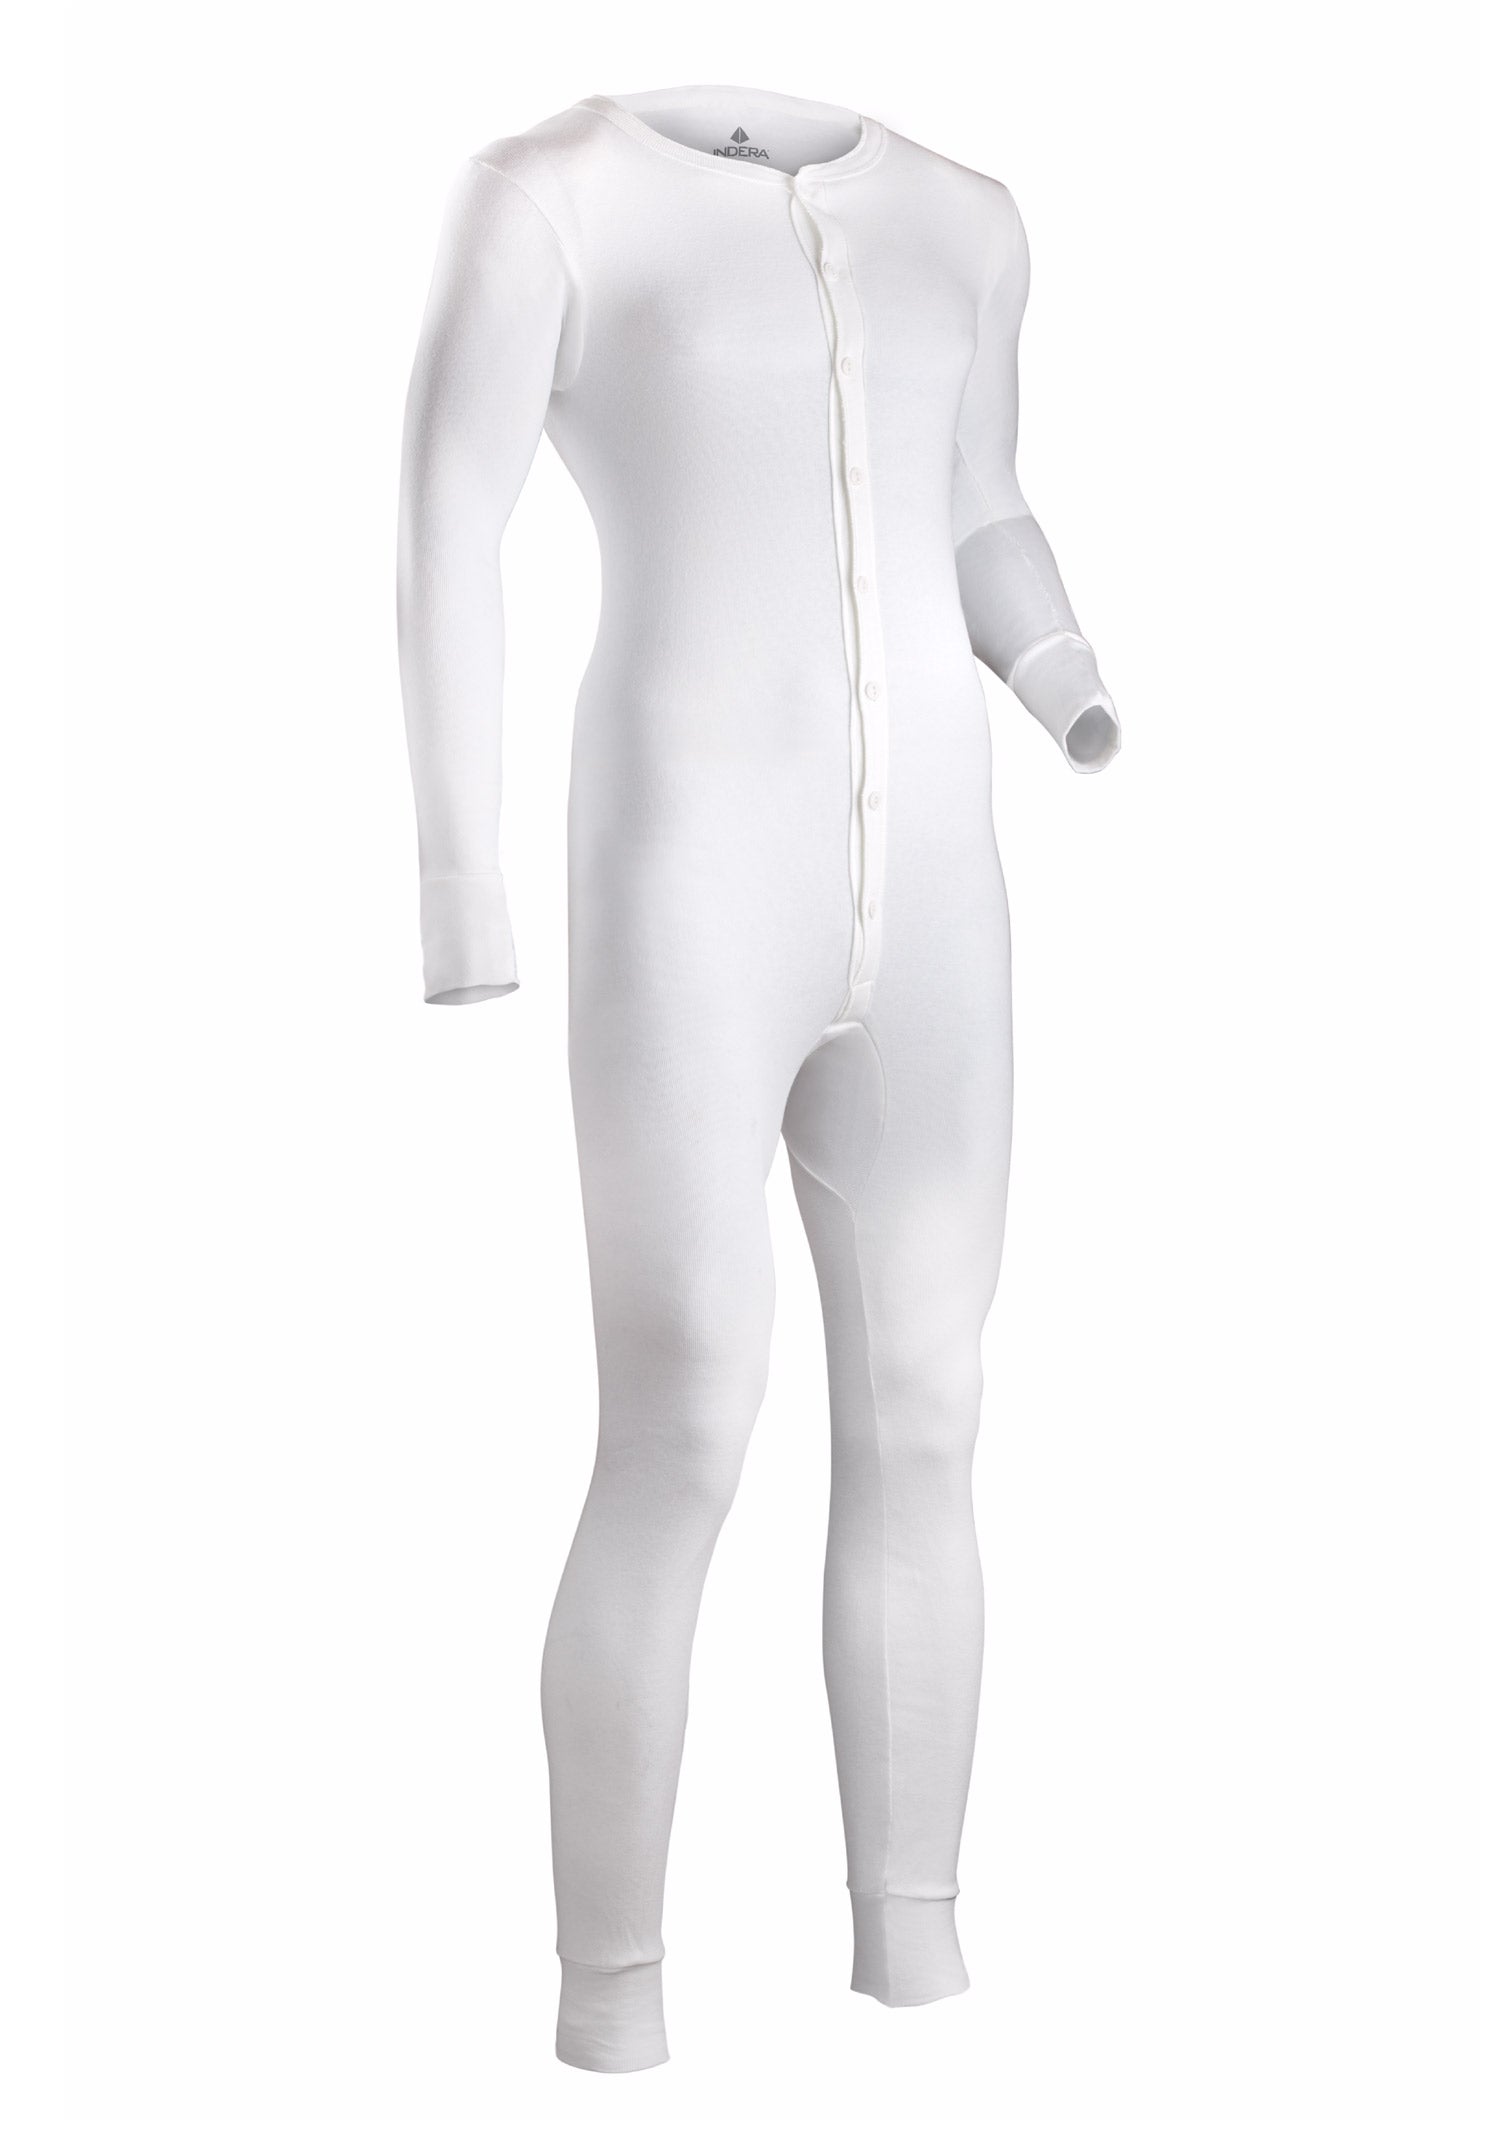 Coldmast Union Suits in White - 860-R - Regular Si